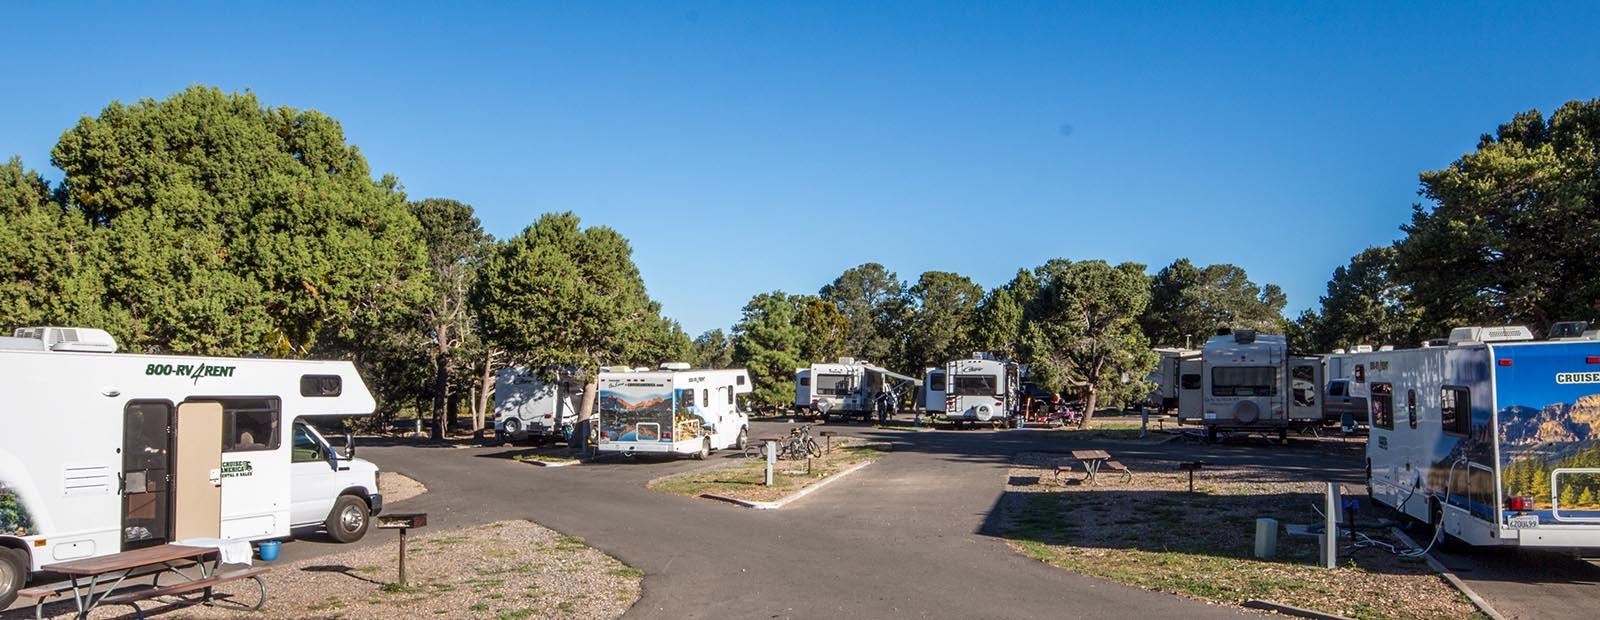 a wide panorama showing a number of RVs in individual sites.